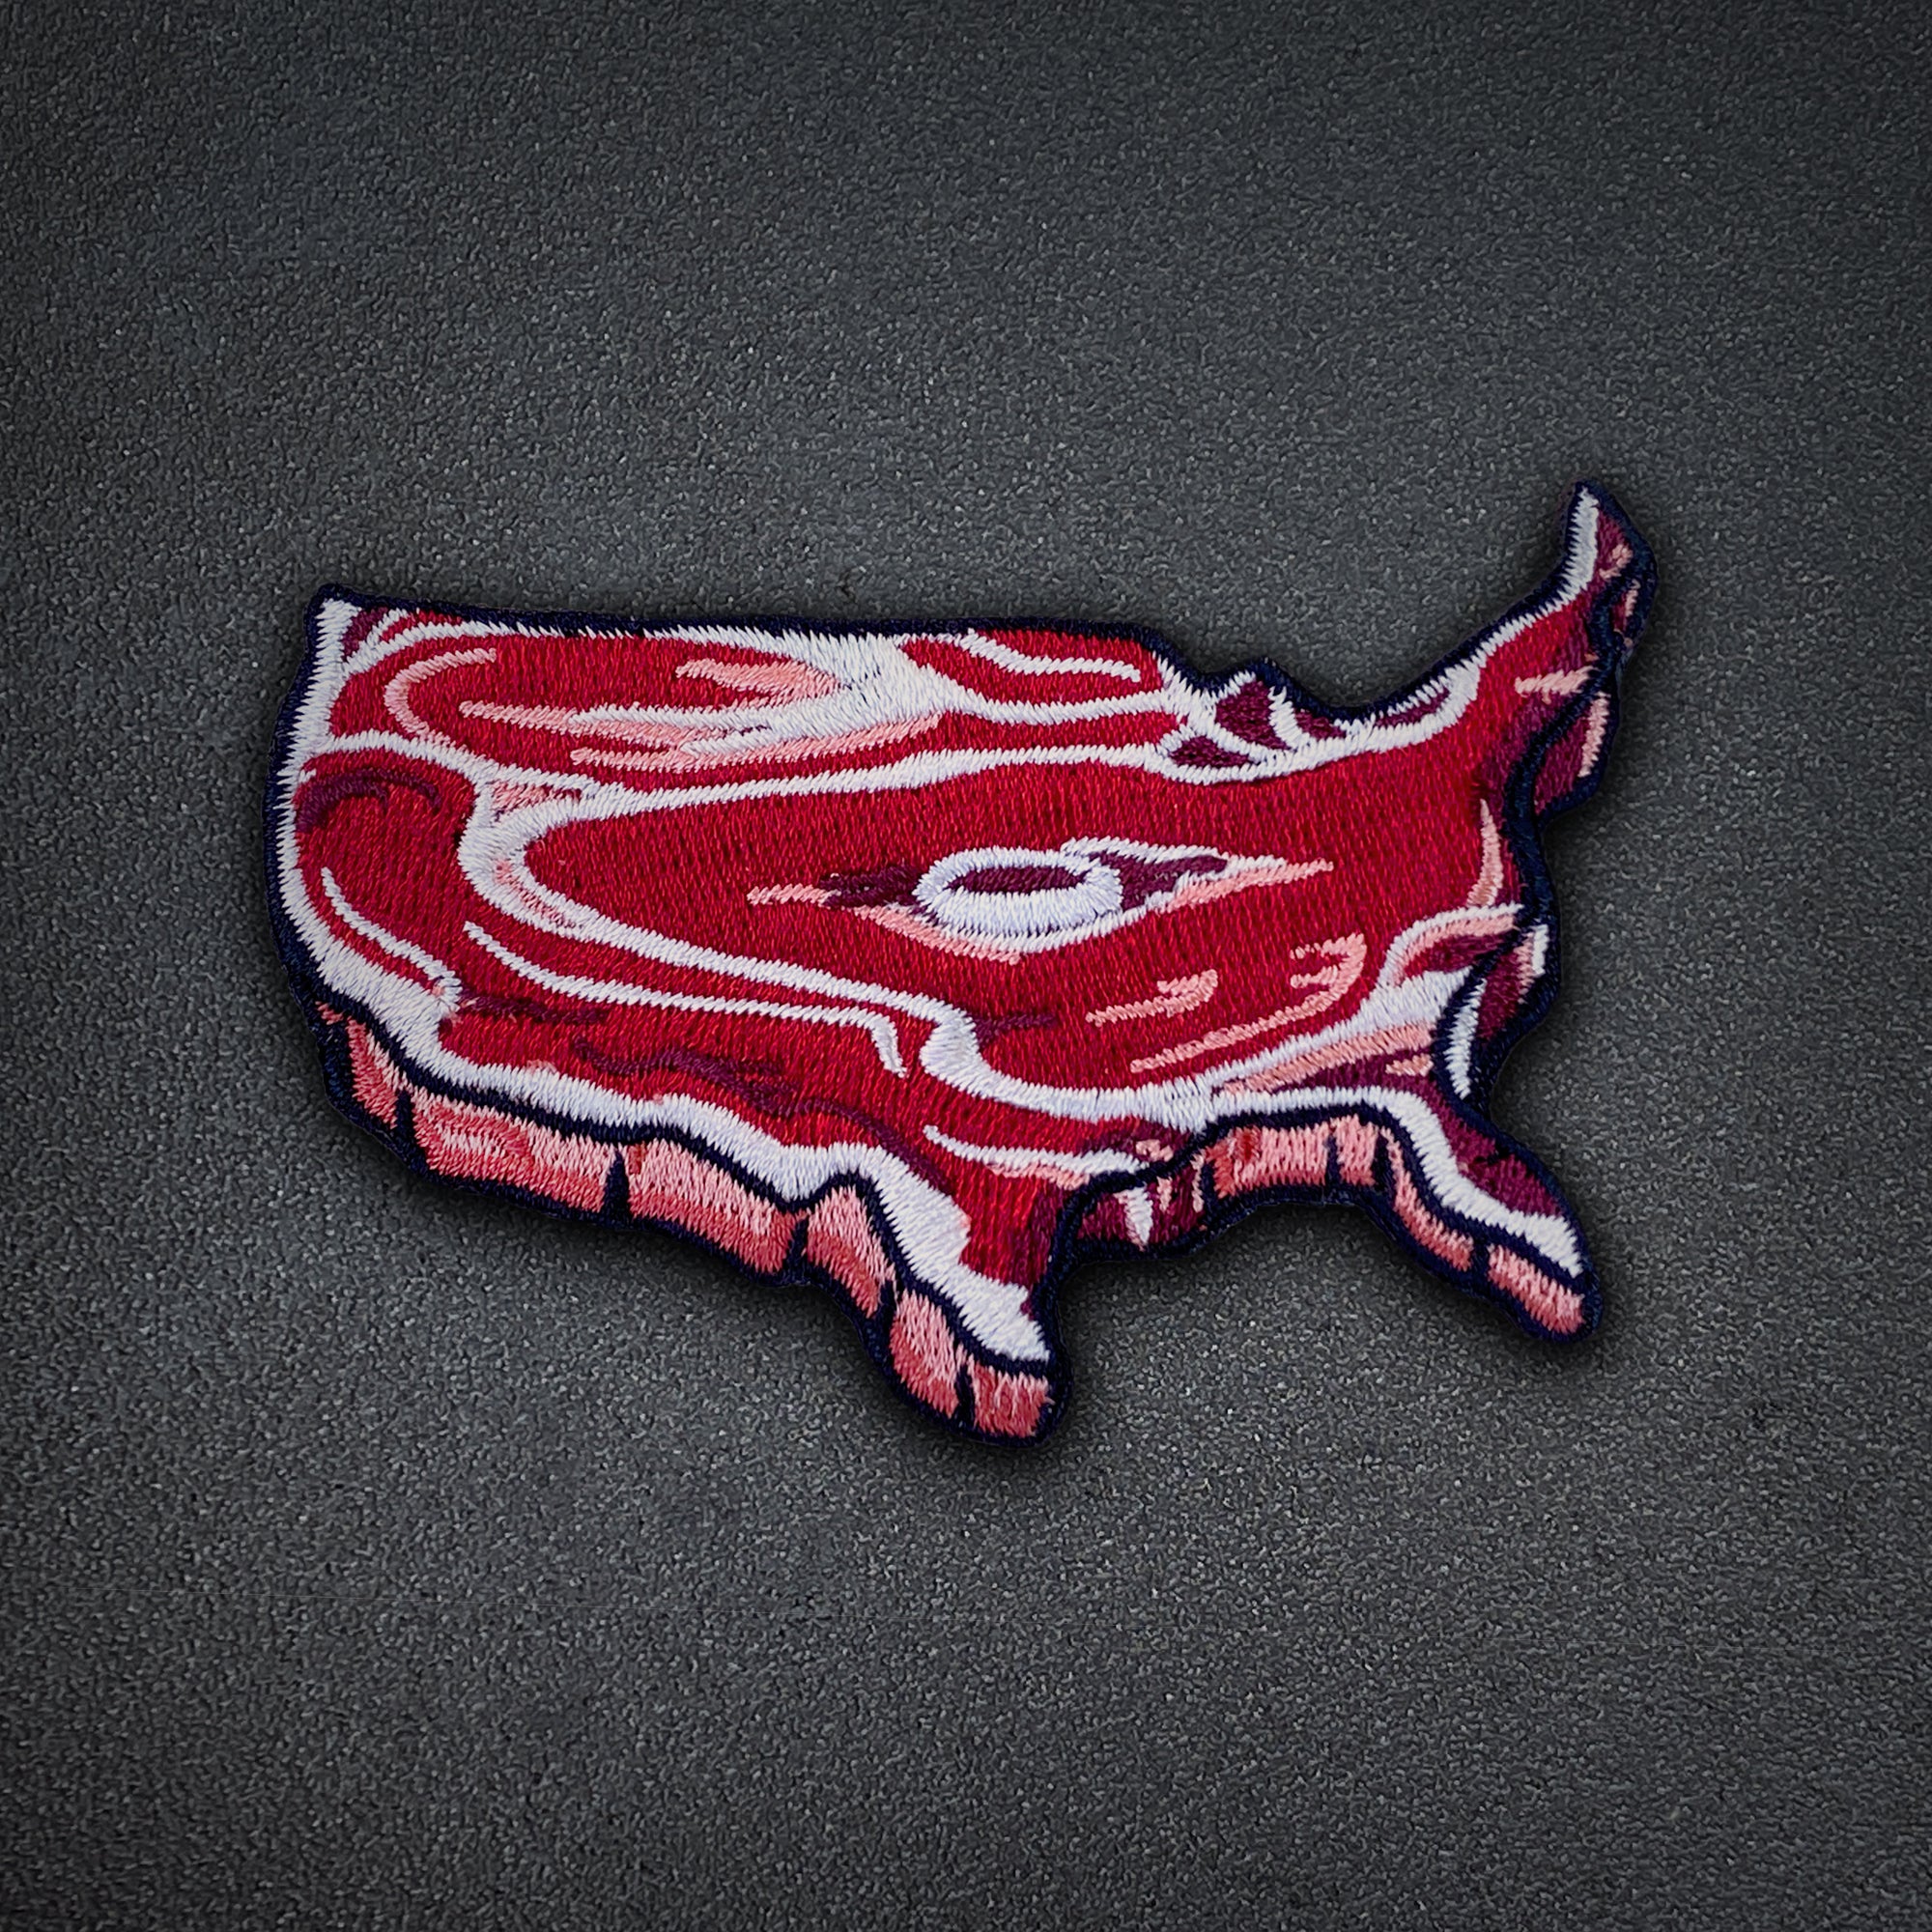 UNITED STEAKS OF AMERICA PATCH